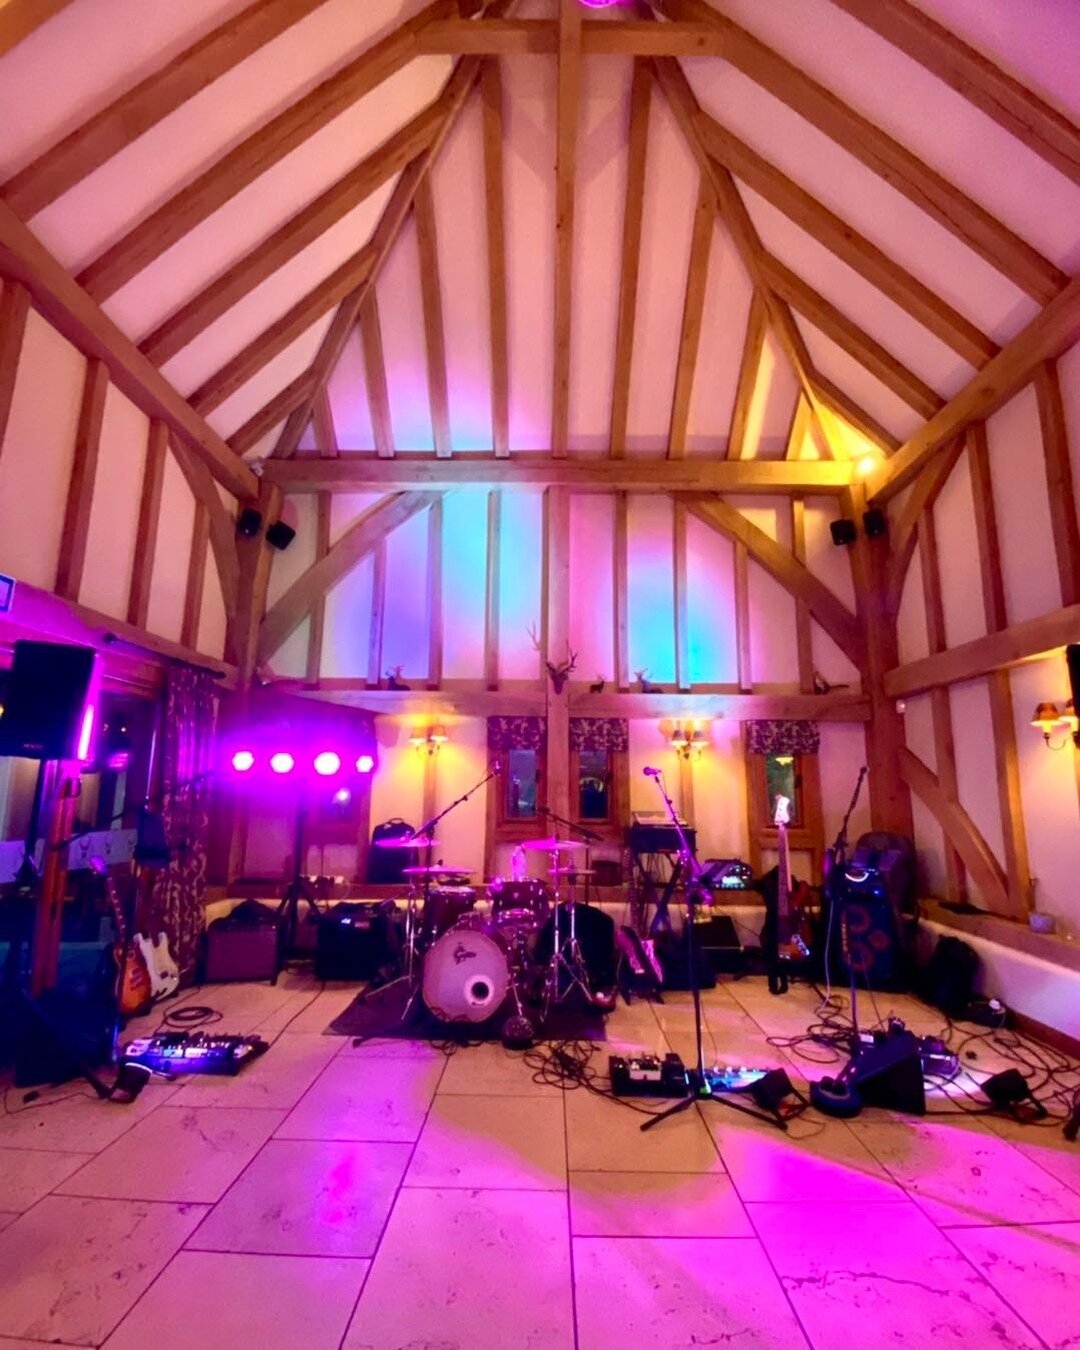 All setup and ready to go for Andi &amp; Clair&rsquo;s wedding tonight! Looking forward to seeing everyone on the dance floor!

#wedding #weddingband #rockit #rockitband